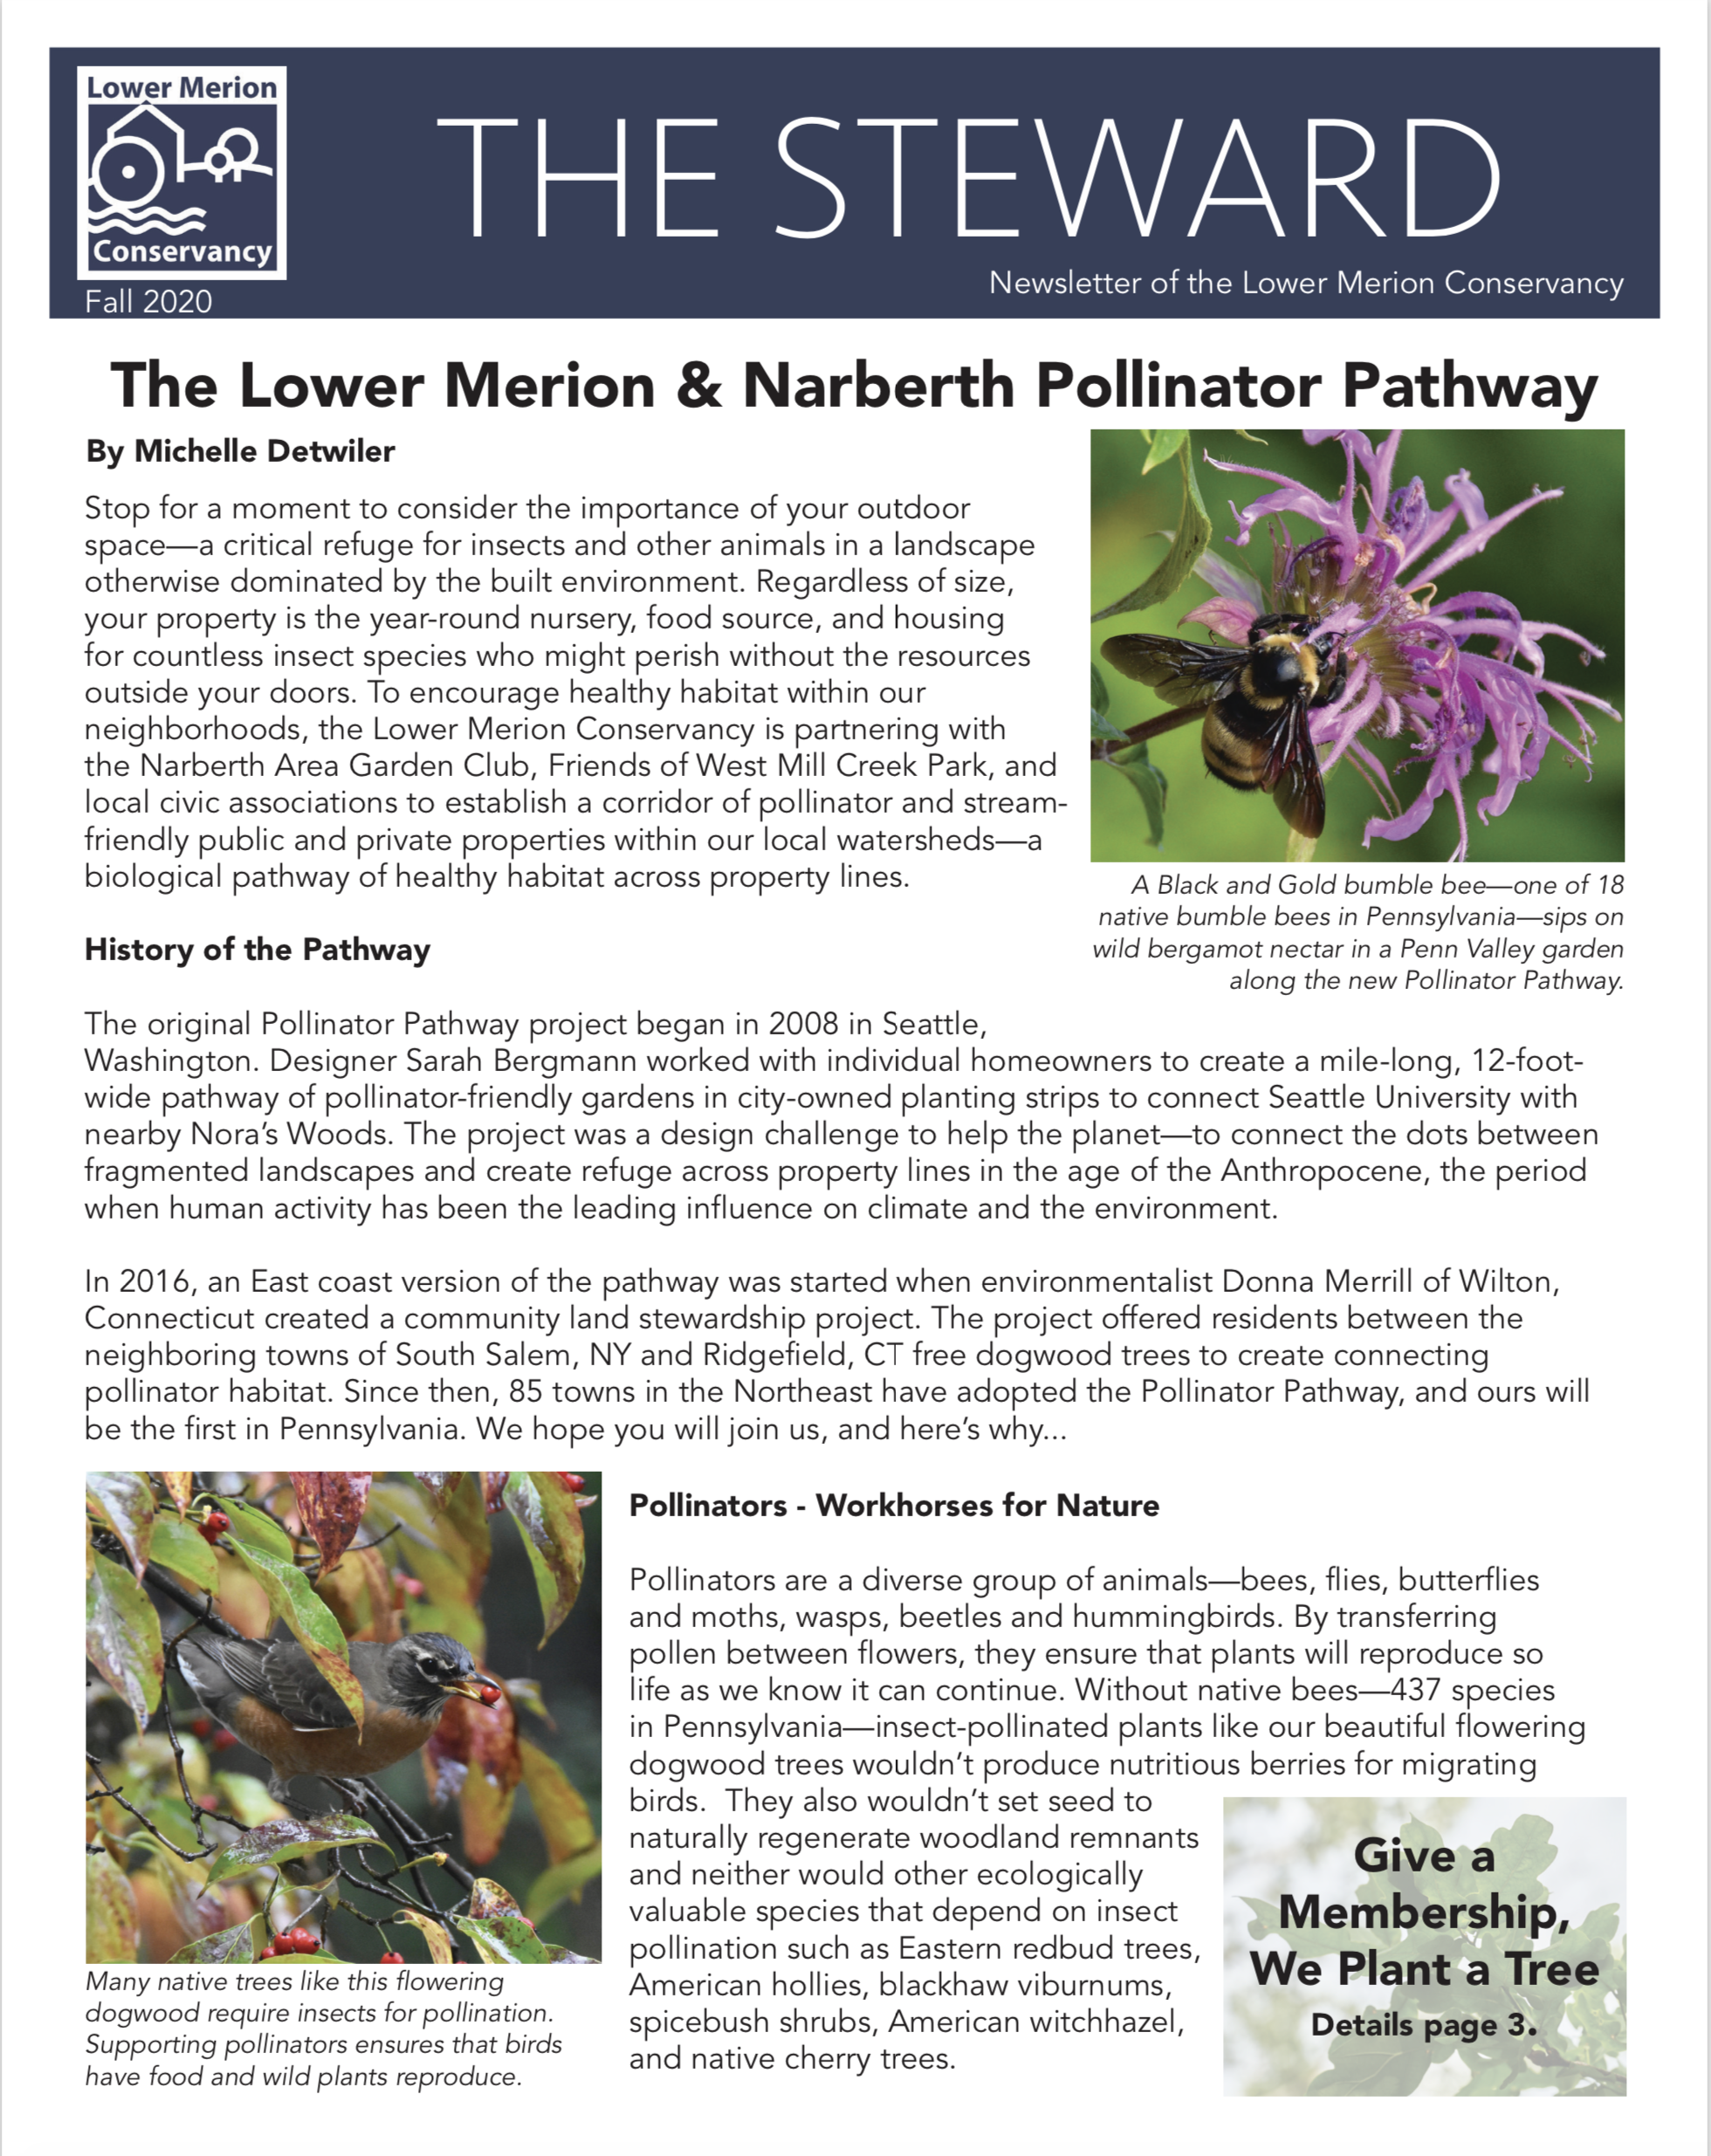 View my recent article about the Lower Merion and Narberth Pollinator Pathway here (Fall 2020).   Scroll through pages 1-6.